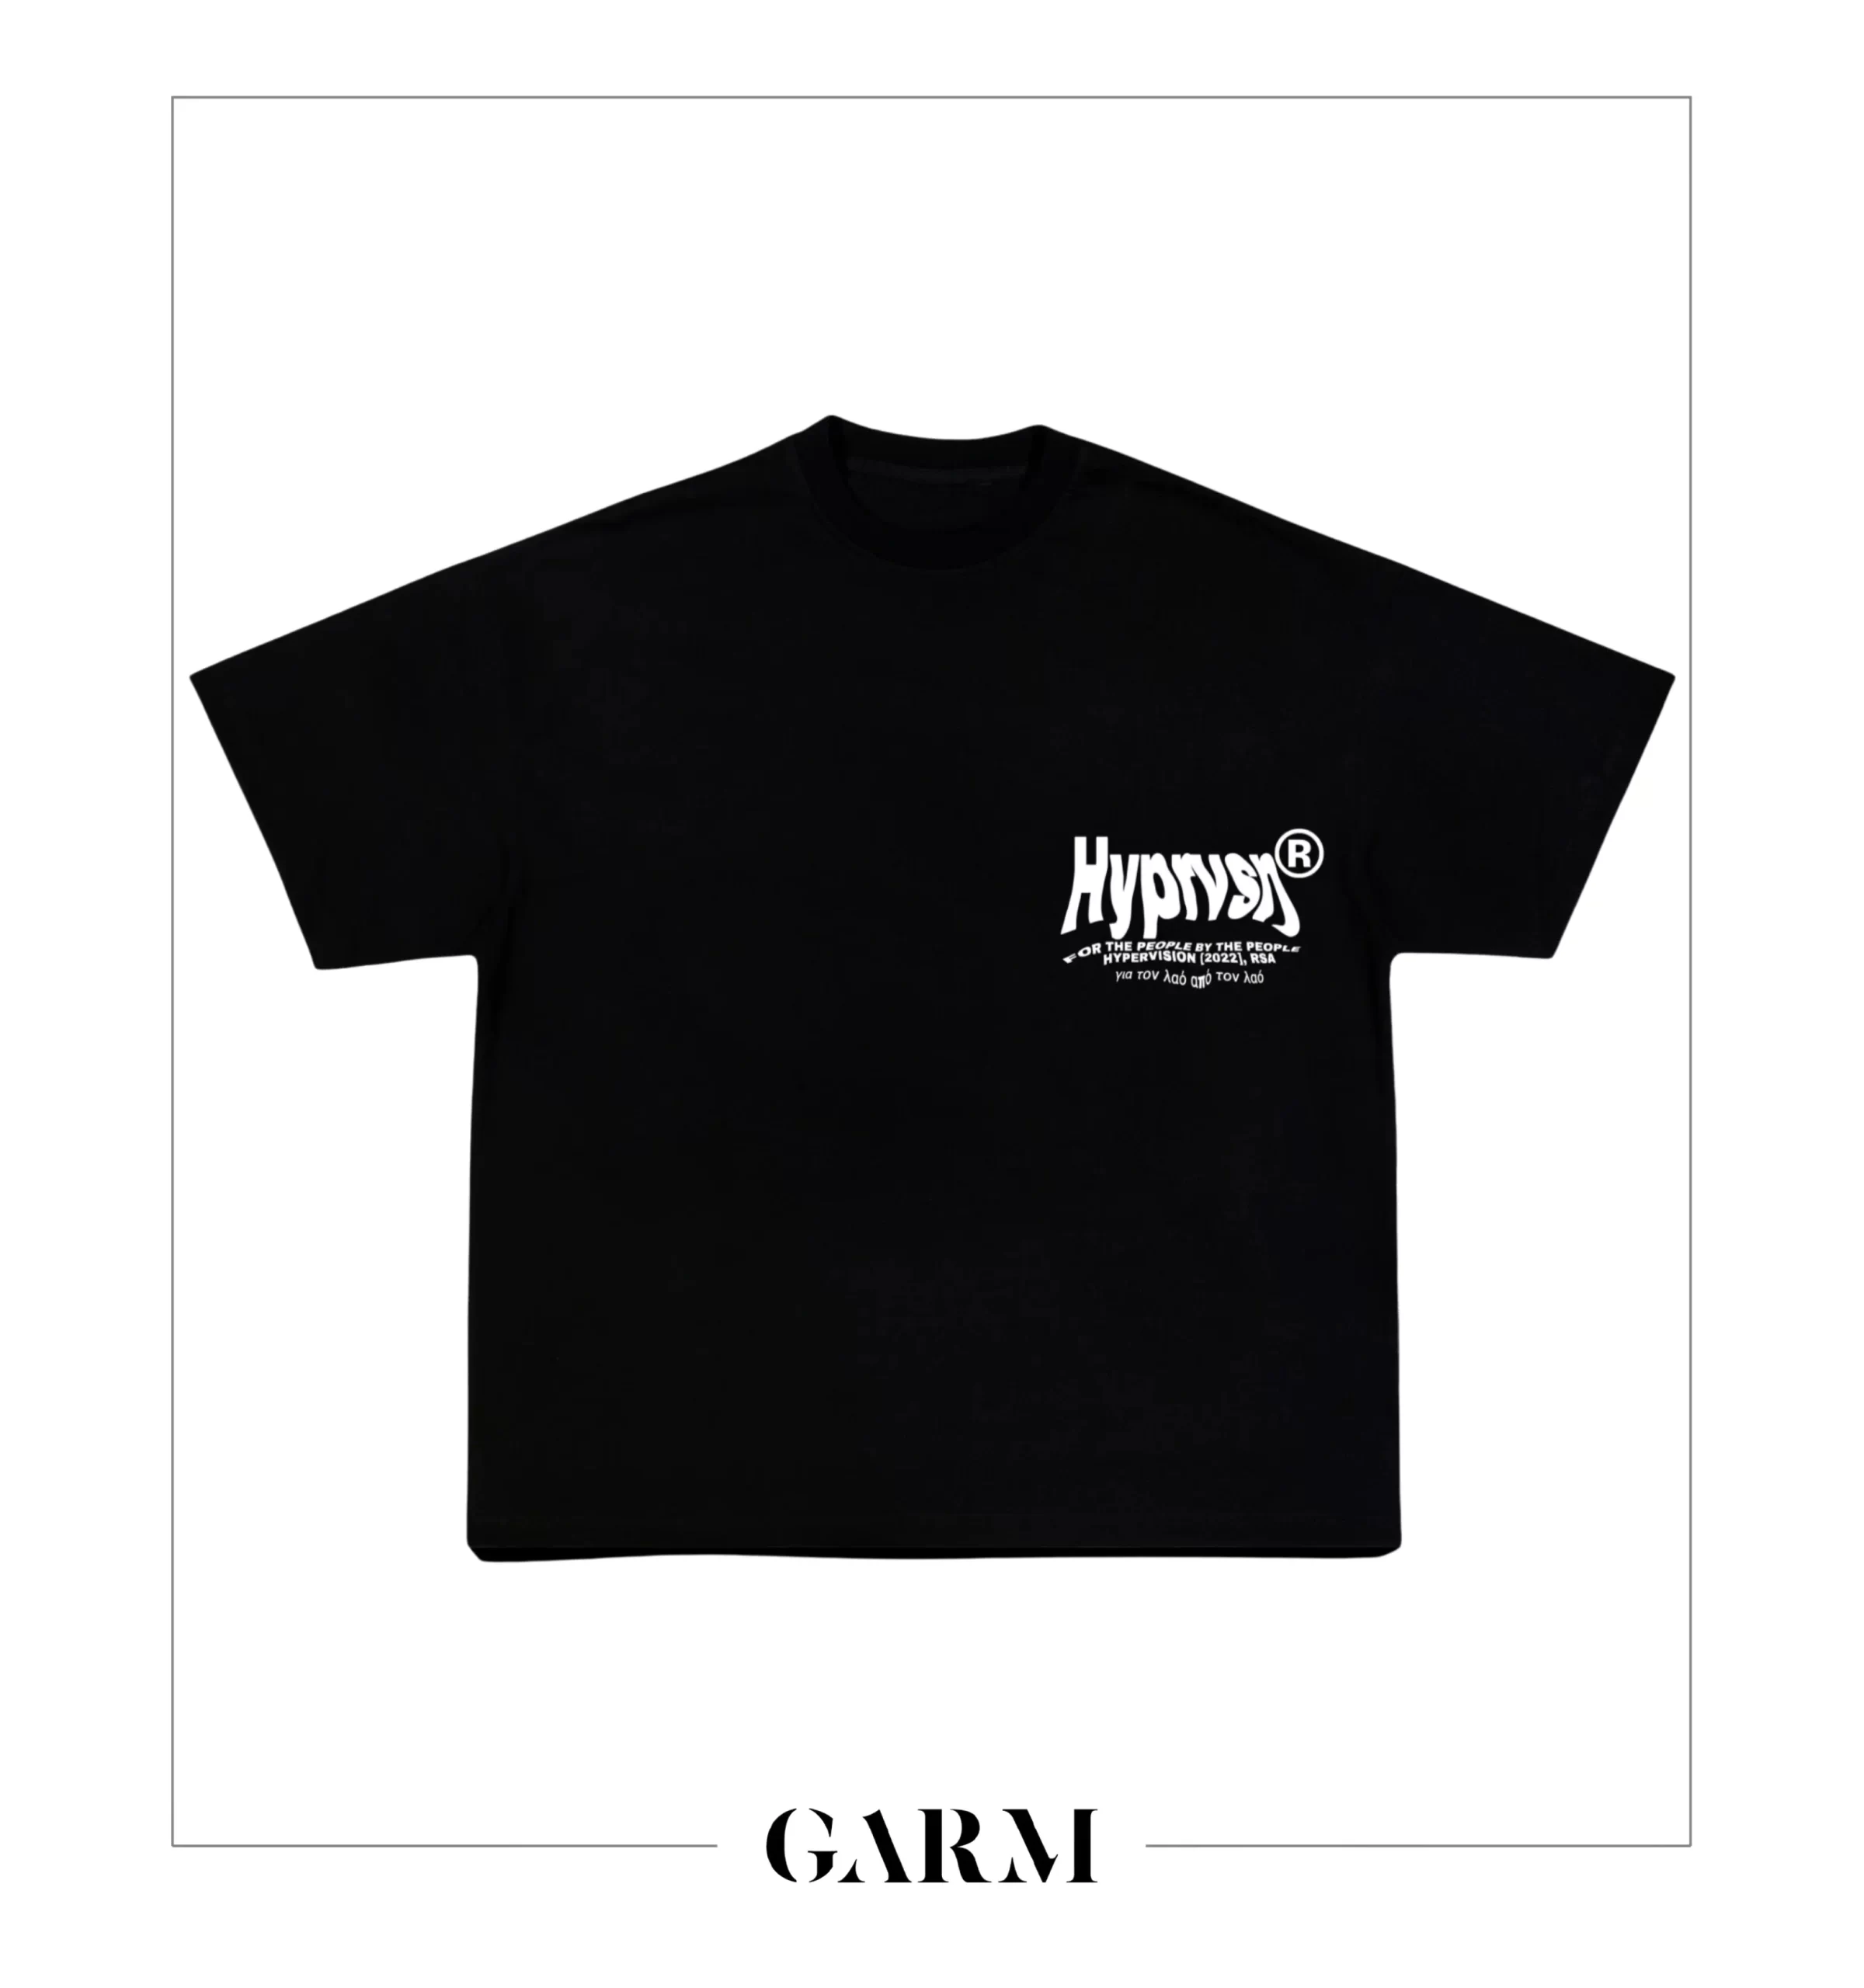 HV10 [BLACK] T-SHIRT by Hypervision available on Garm